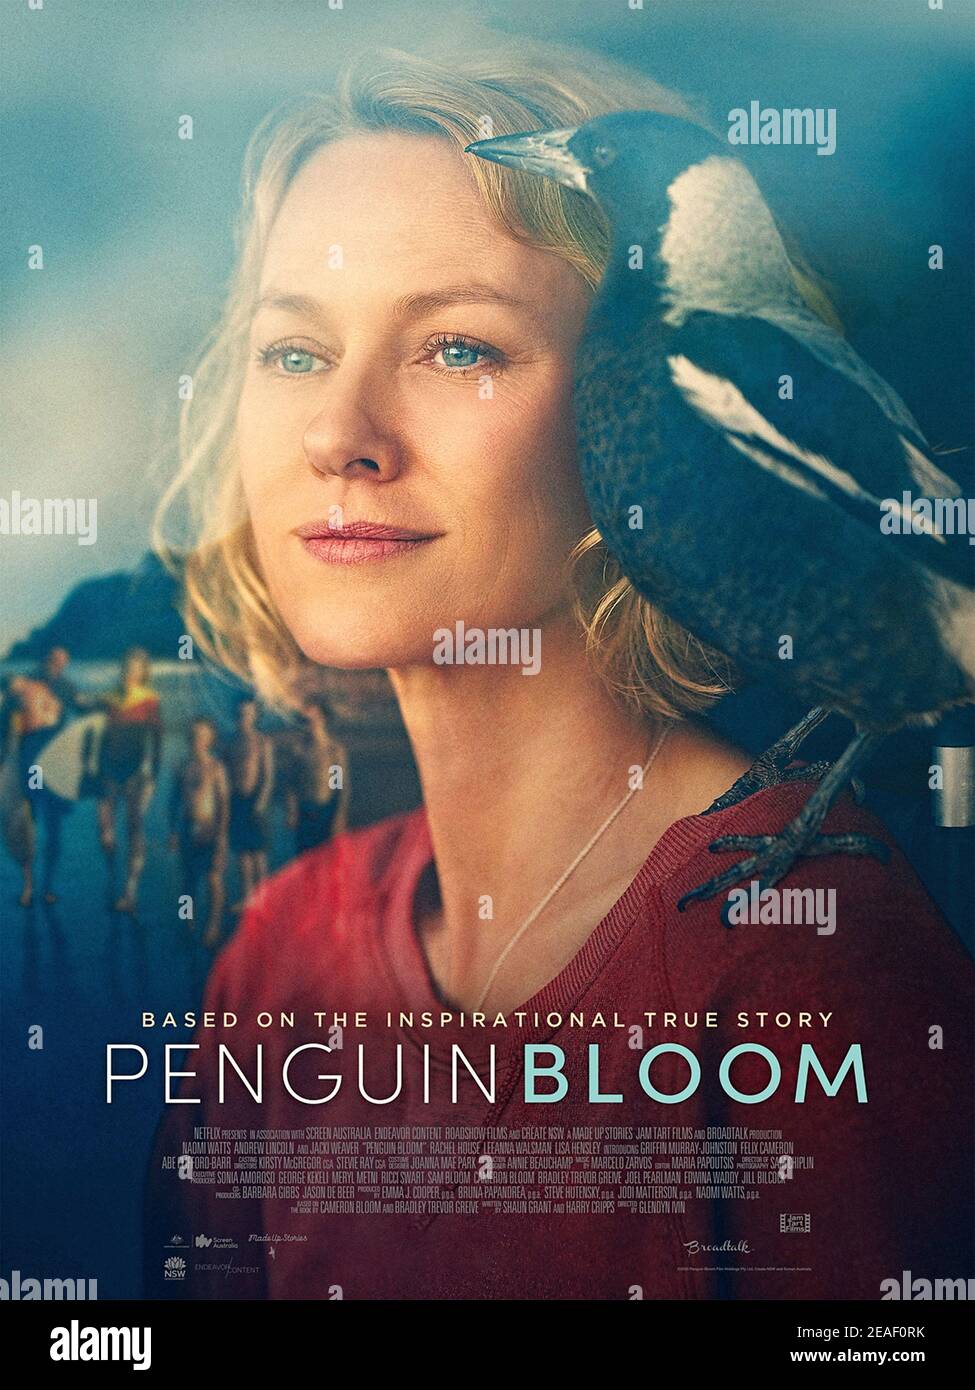 Penguin Bloom (2020) directed by Glendyn Ivin and starring Naomi Watts, Griffin Murray-Johnston and Andrew Lincoln. A family takes in an injured Magpie that makes a profound difference in their lives. Stock Photo